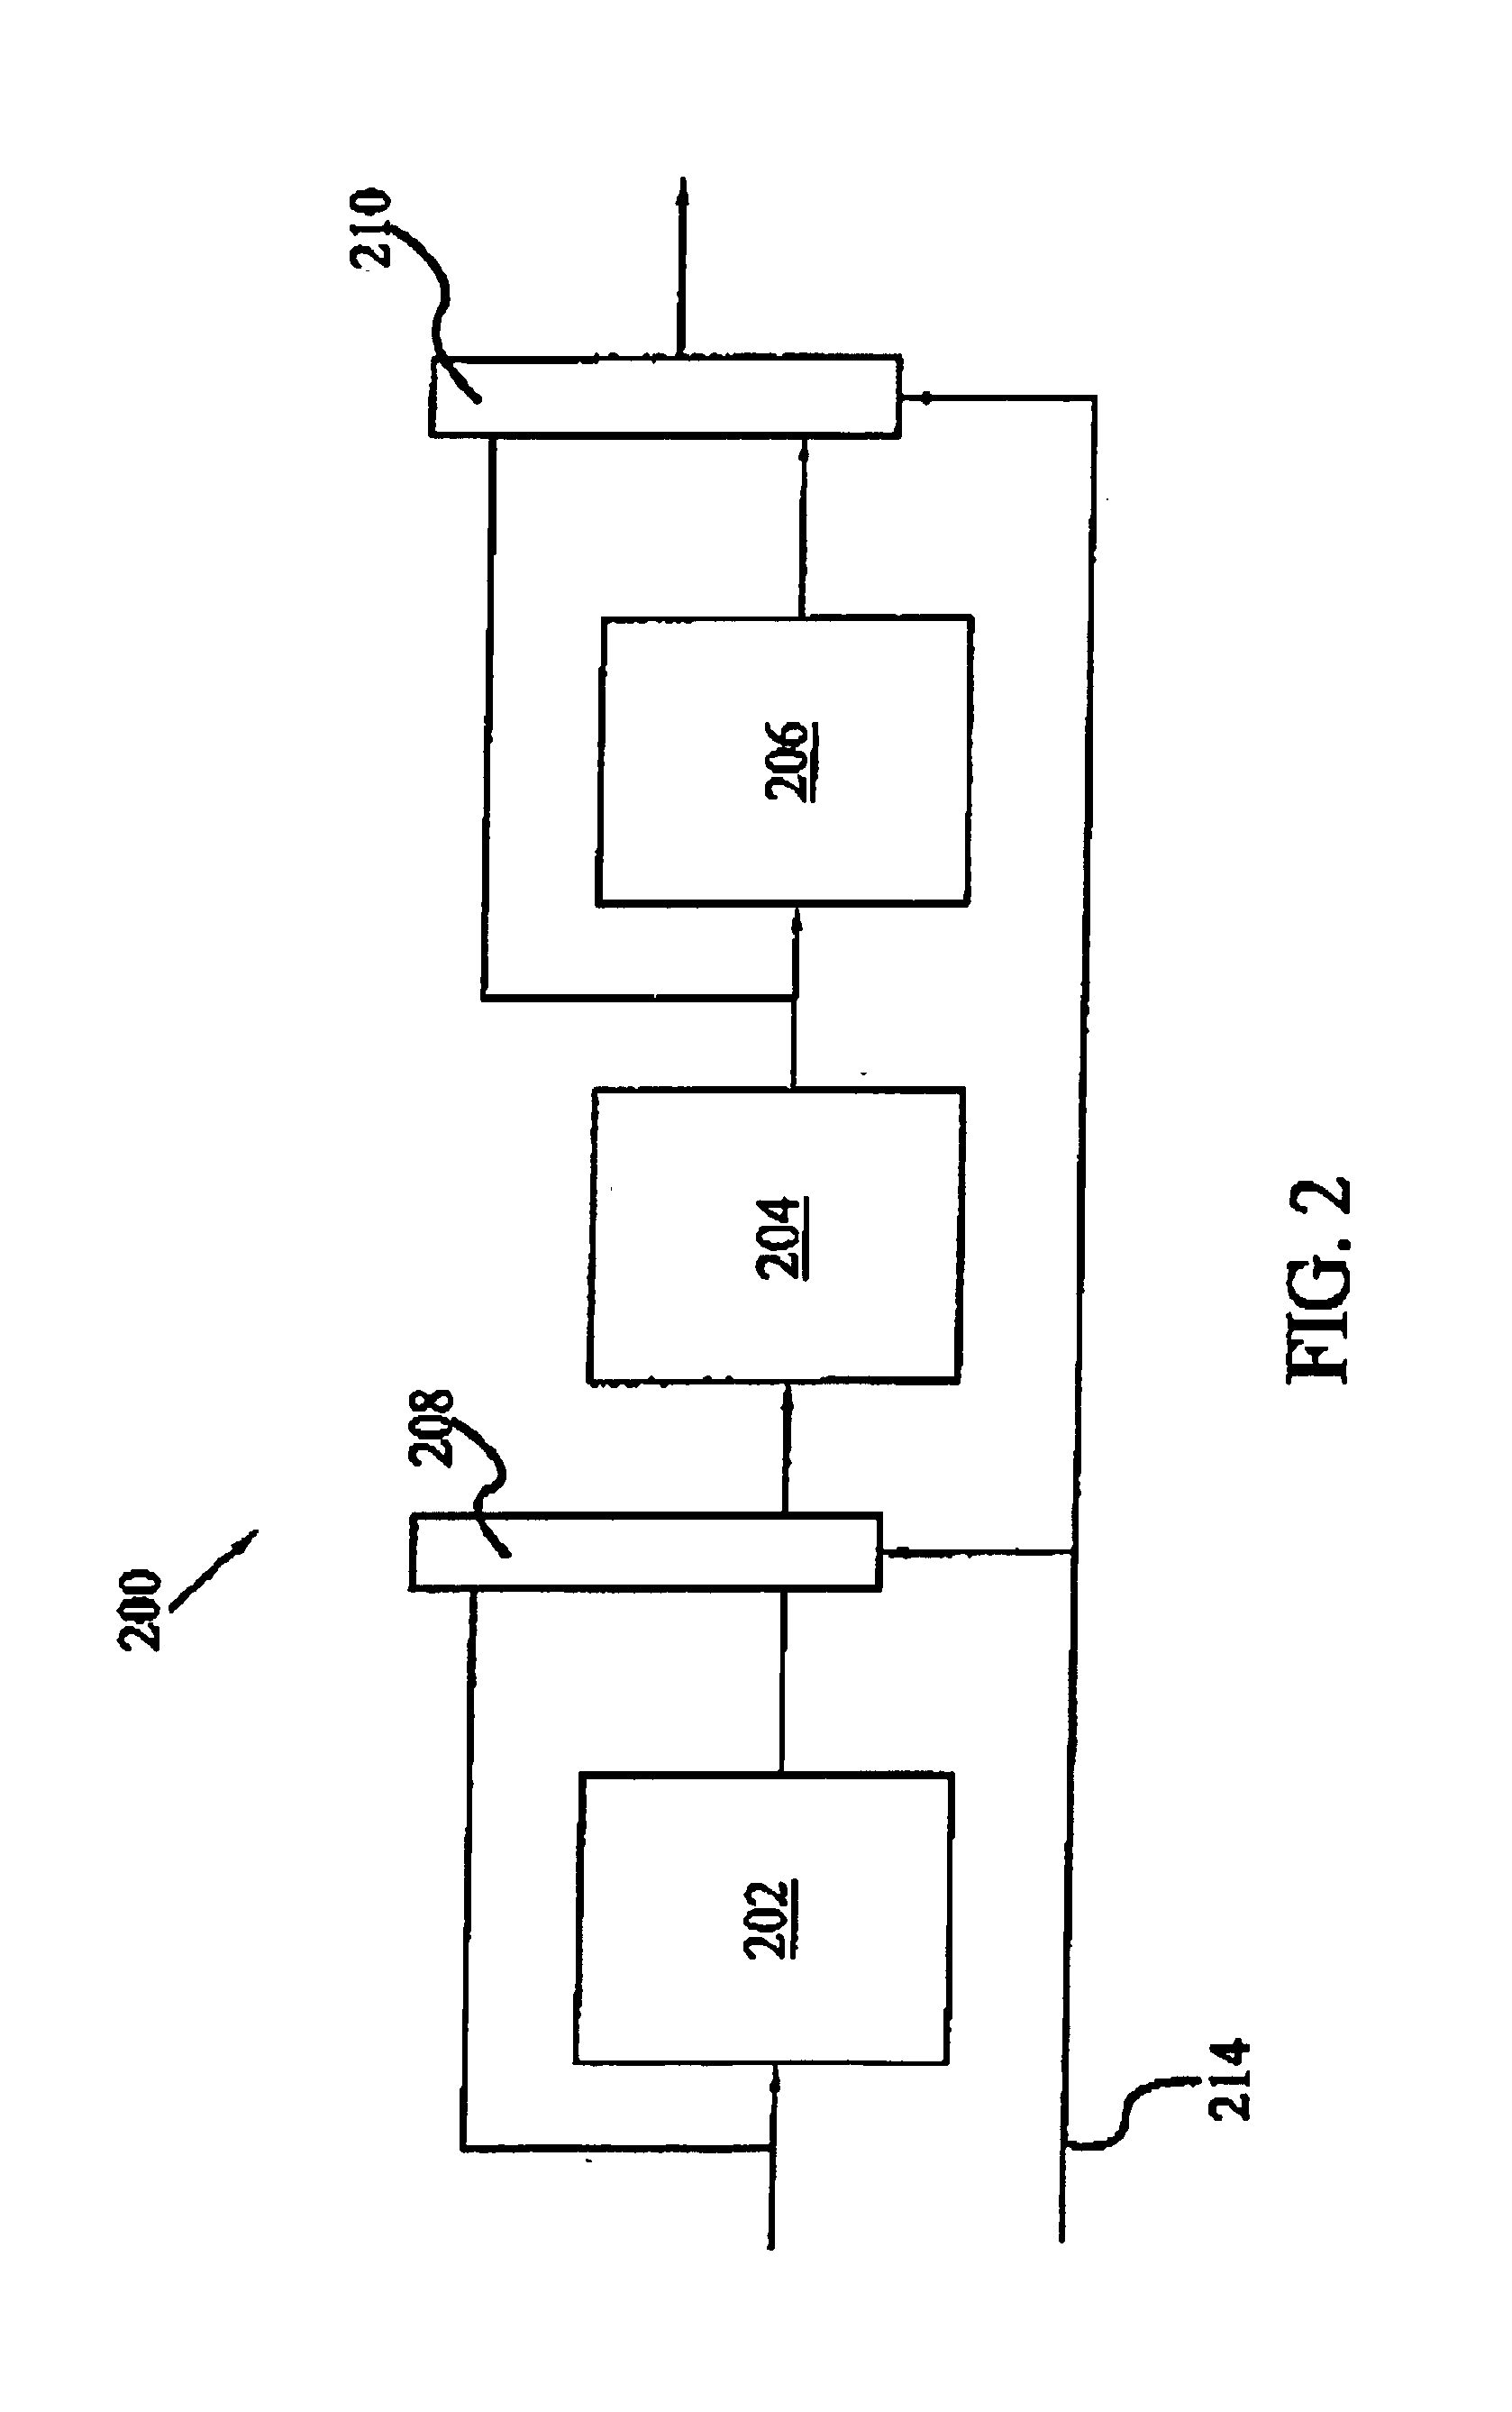 Circuit and method for implementing the advanced encryption standard block cipher algorithm in a system having a plurality of channels